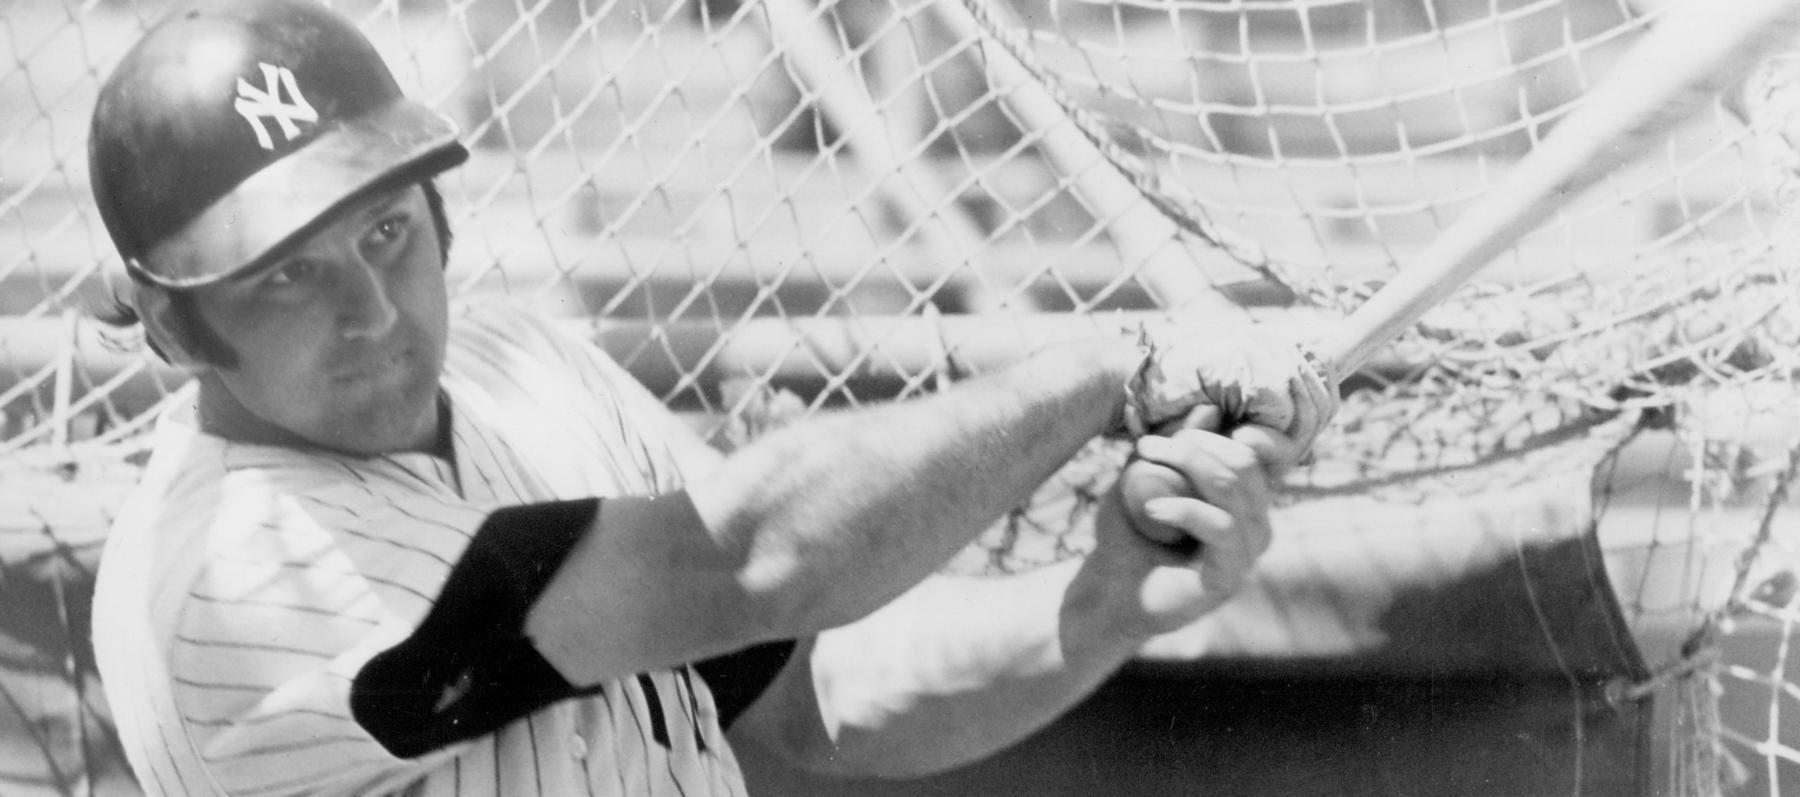 25 years later, Thurman Munson's last words remain a symbol of his